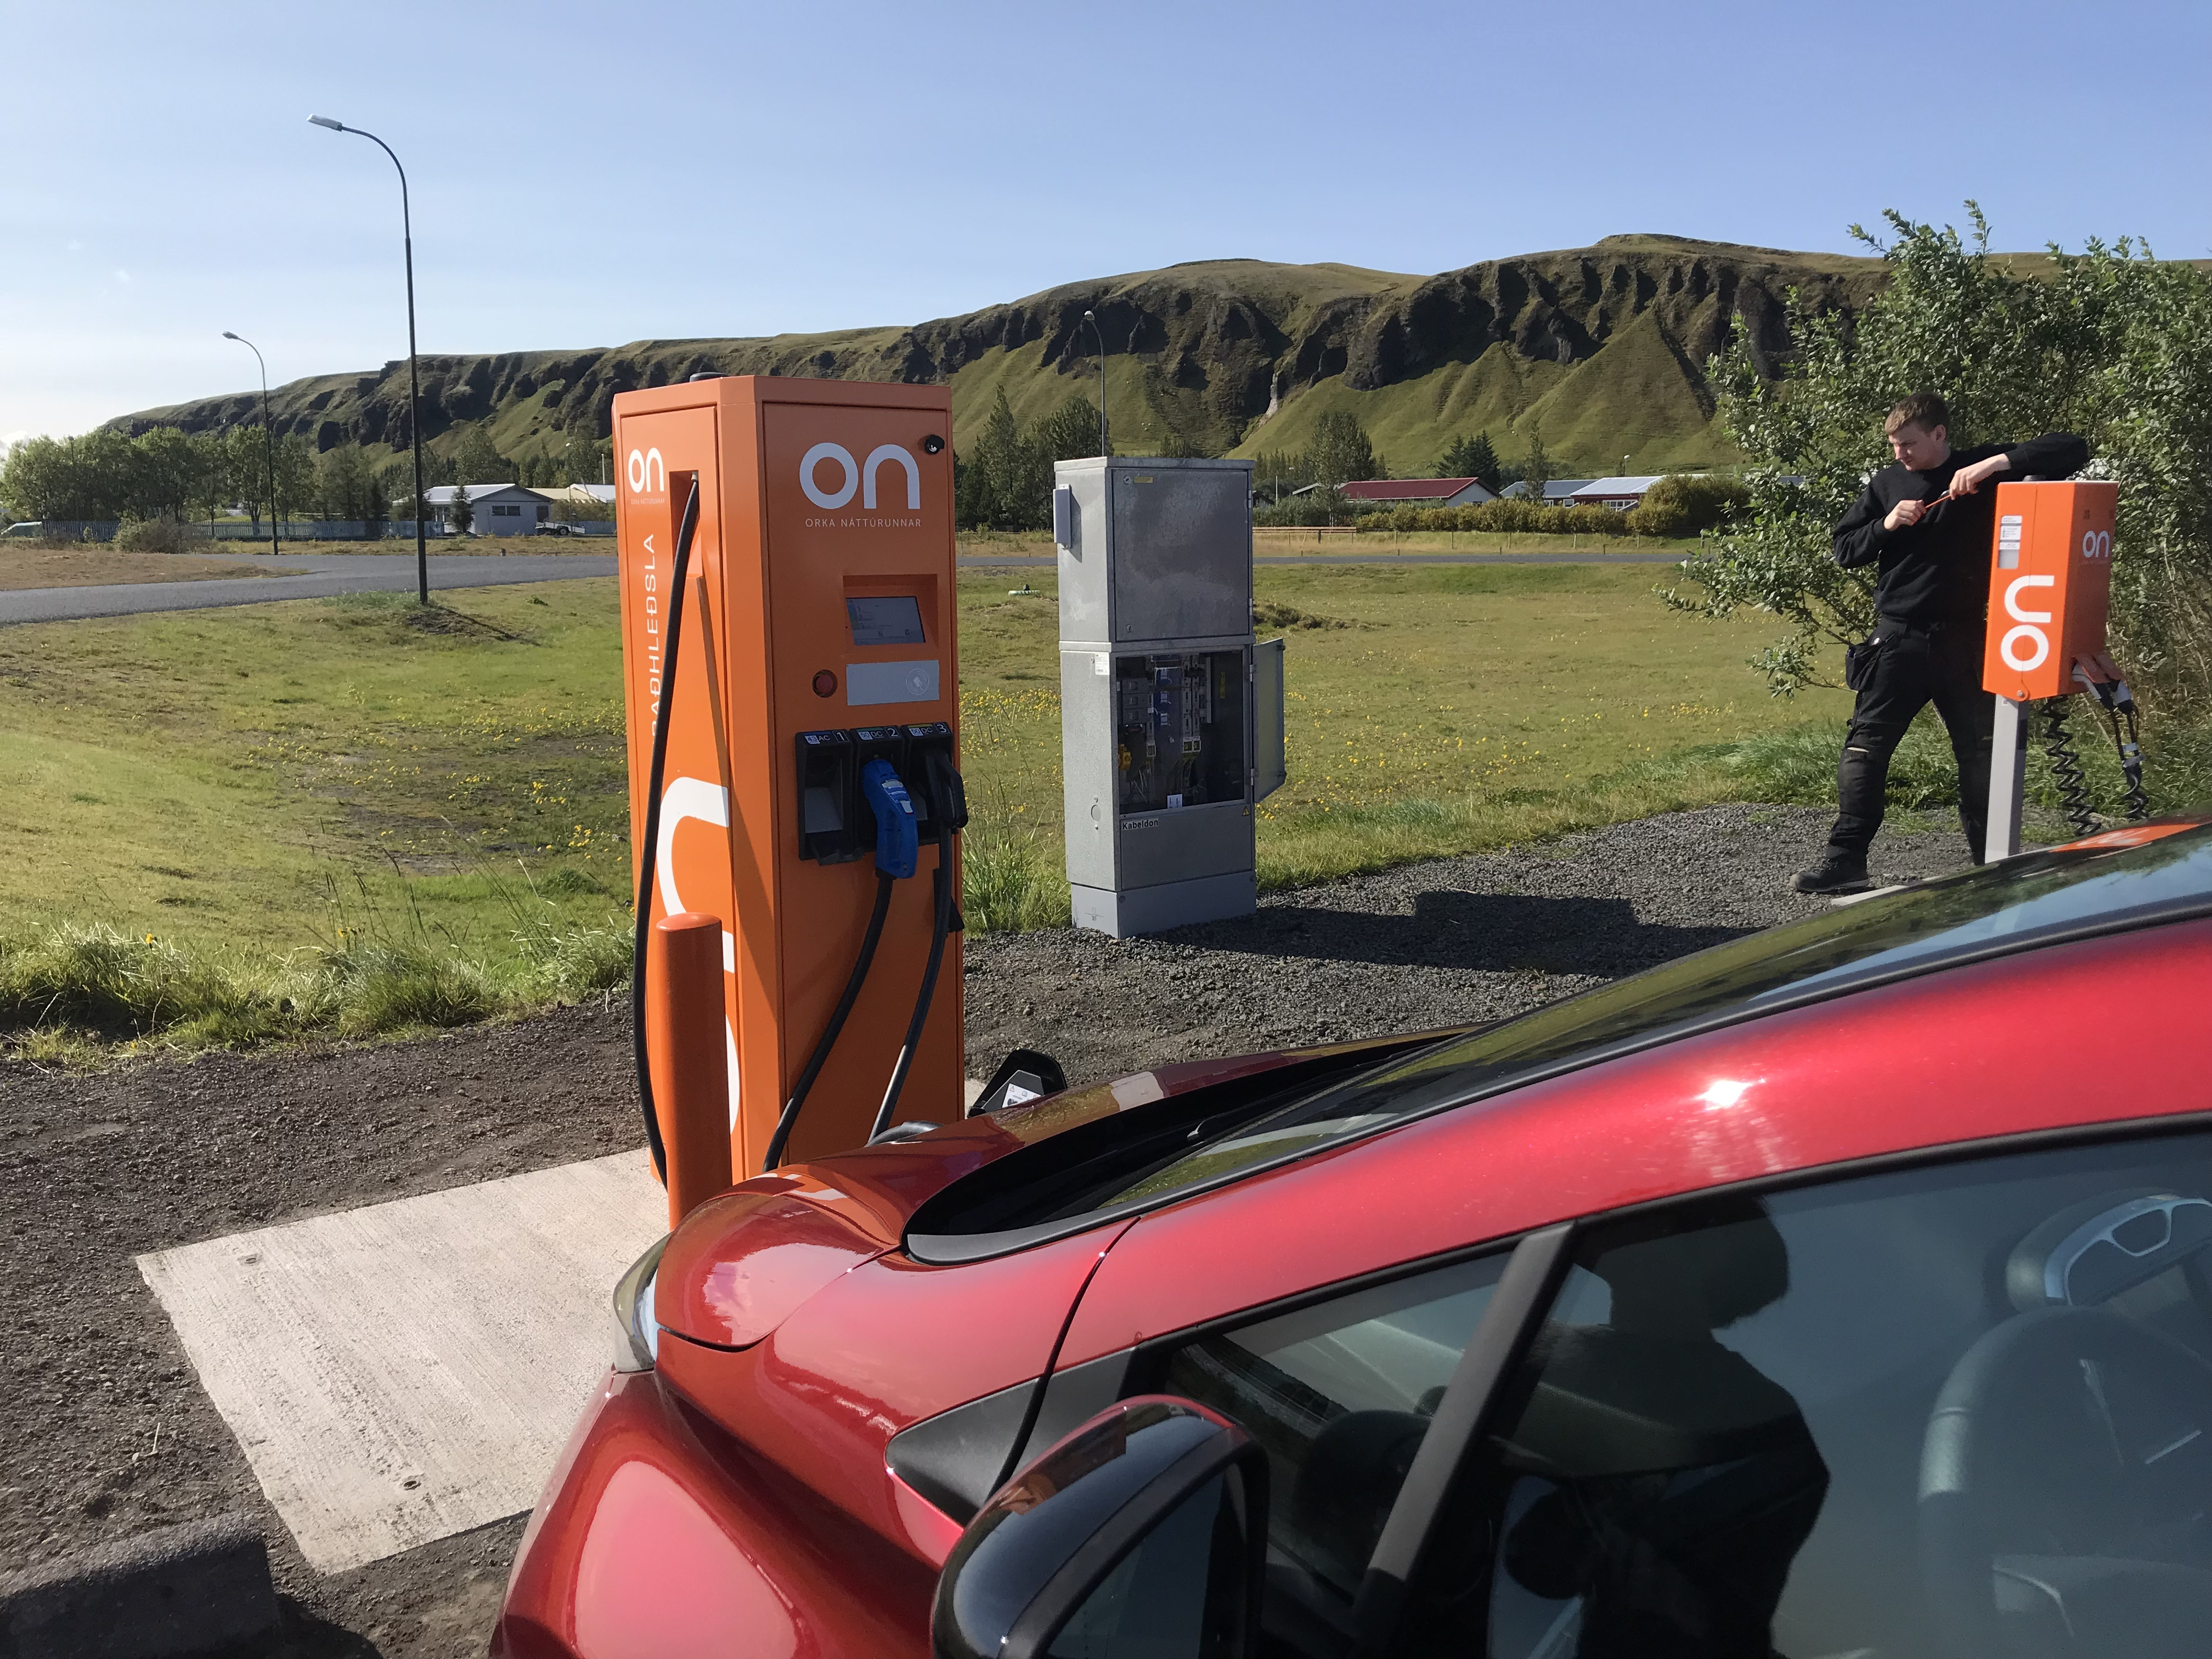 [Super Duper Fantastic] How to Drive Around Iceland in an Electric Vehicle